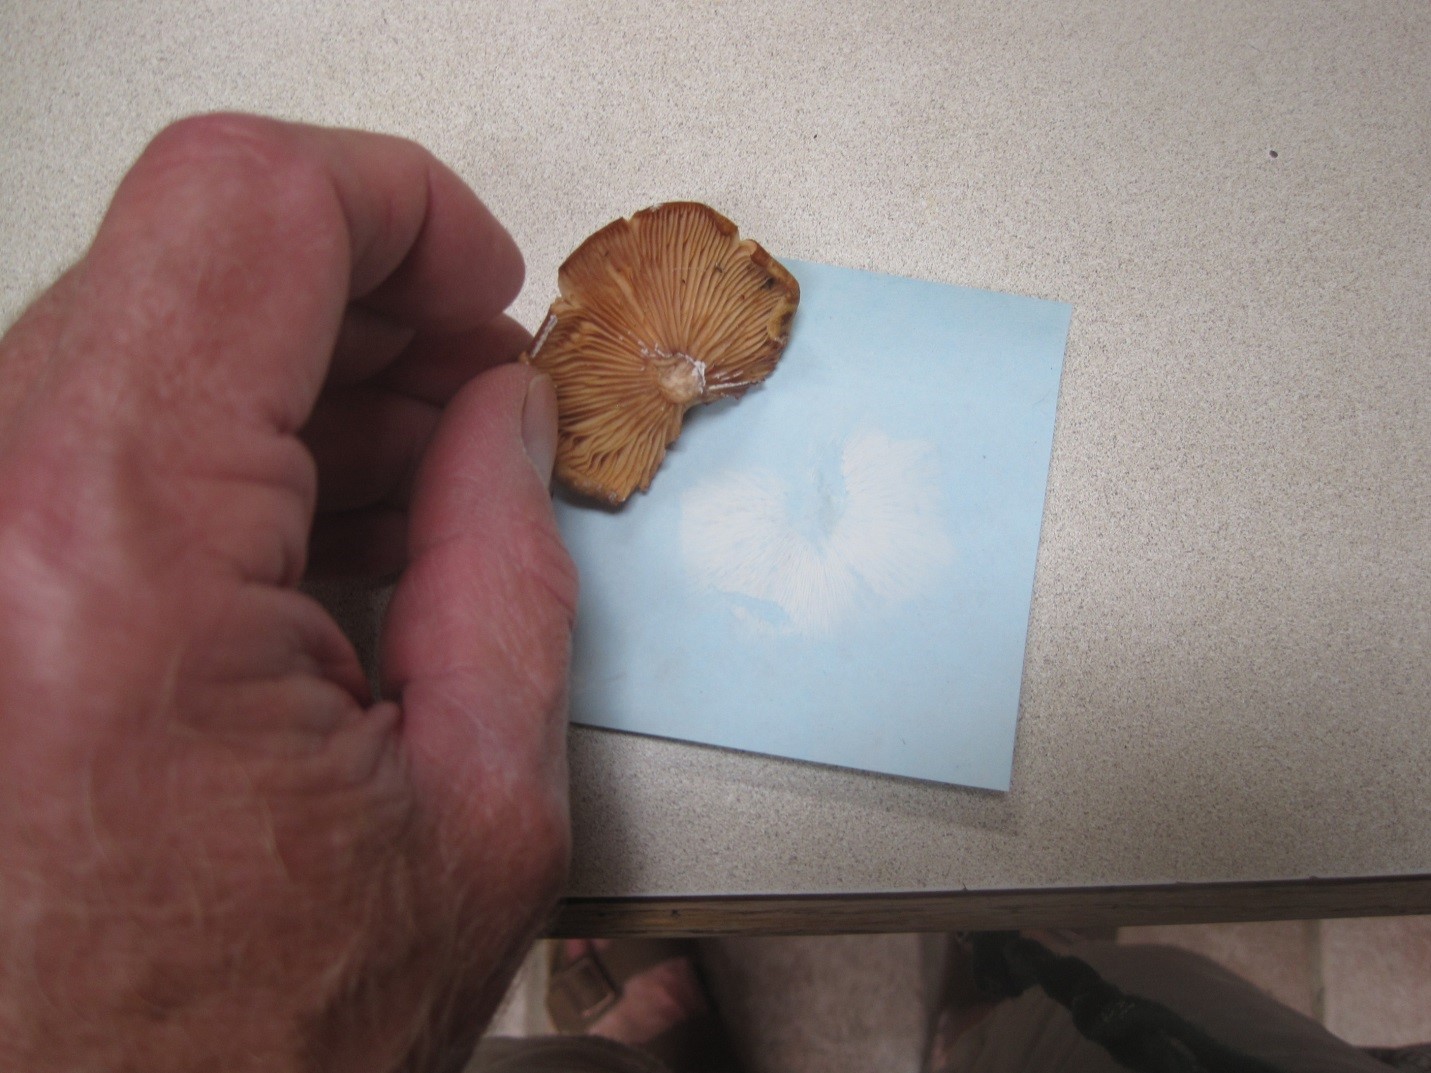 Photograph 2. Spore print made by removing and placing the cap of a gilled fungus on colored paper. Placing a bowl or other covering over the cap can induce spore release onto the paper by increasing the humidity around the cap.